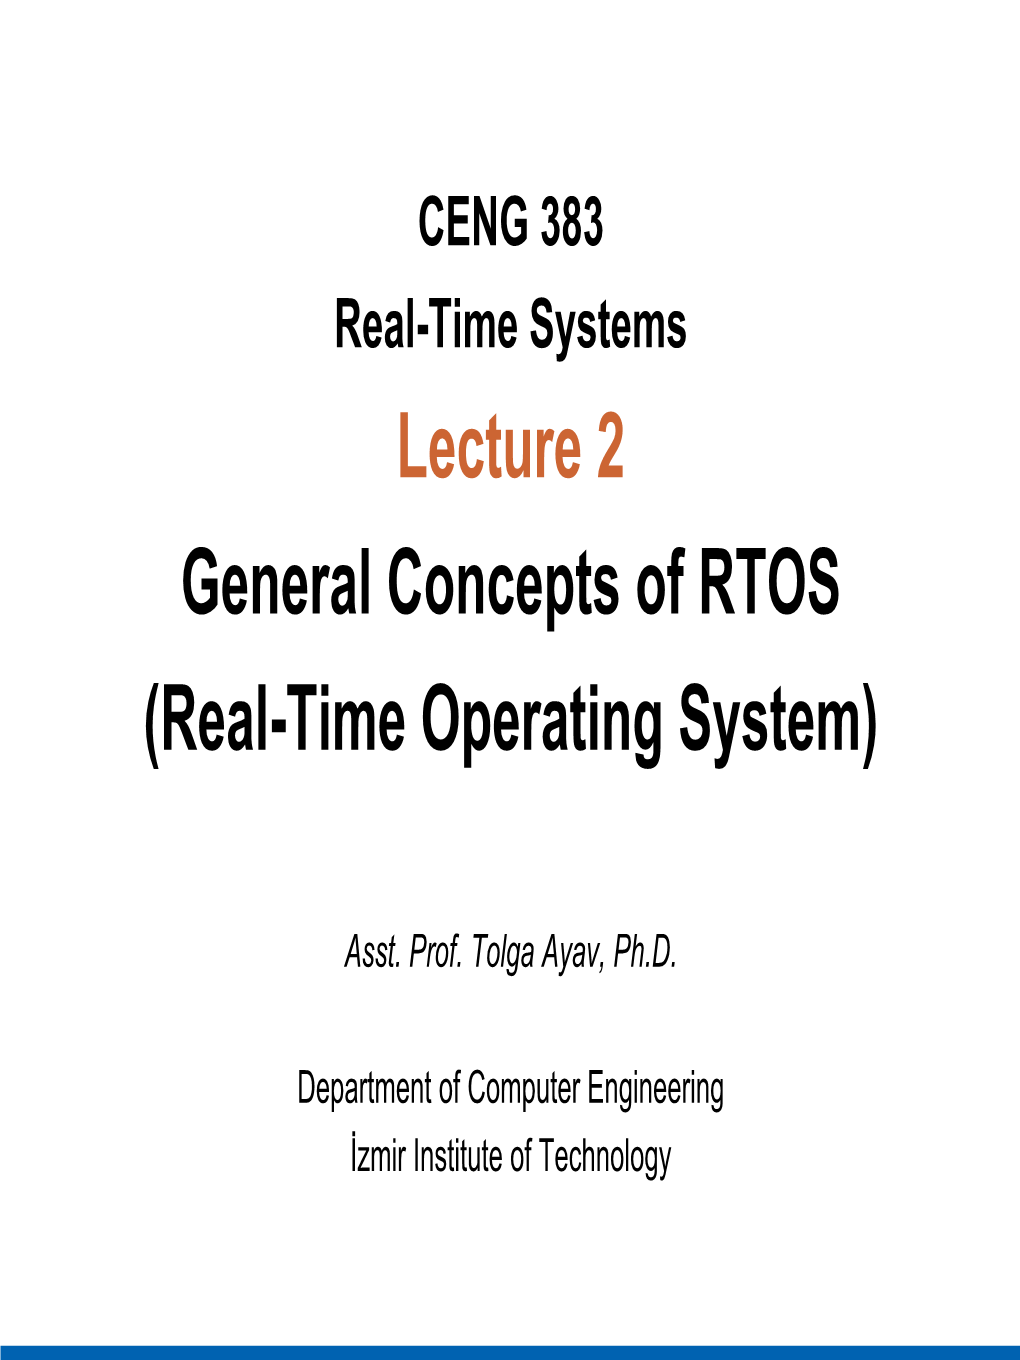 Lecture 2 General Concepts of RTOS (Real-Time Operating System)